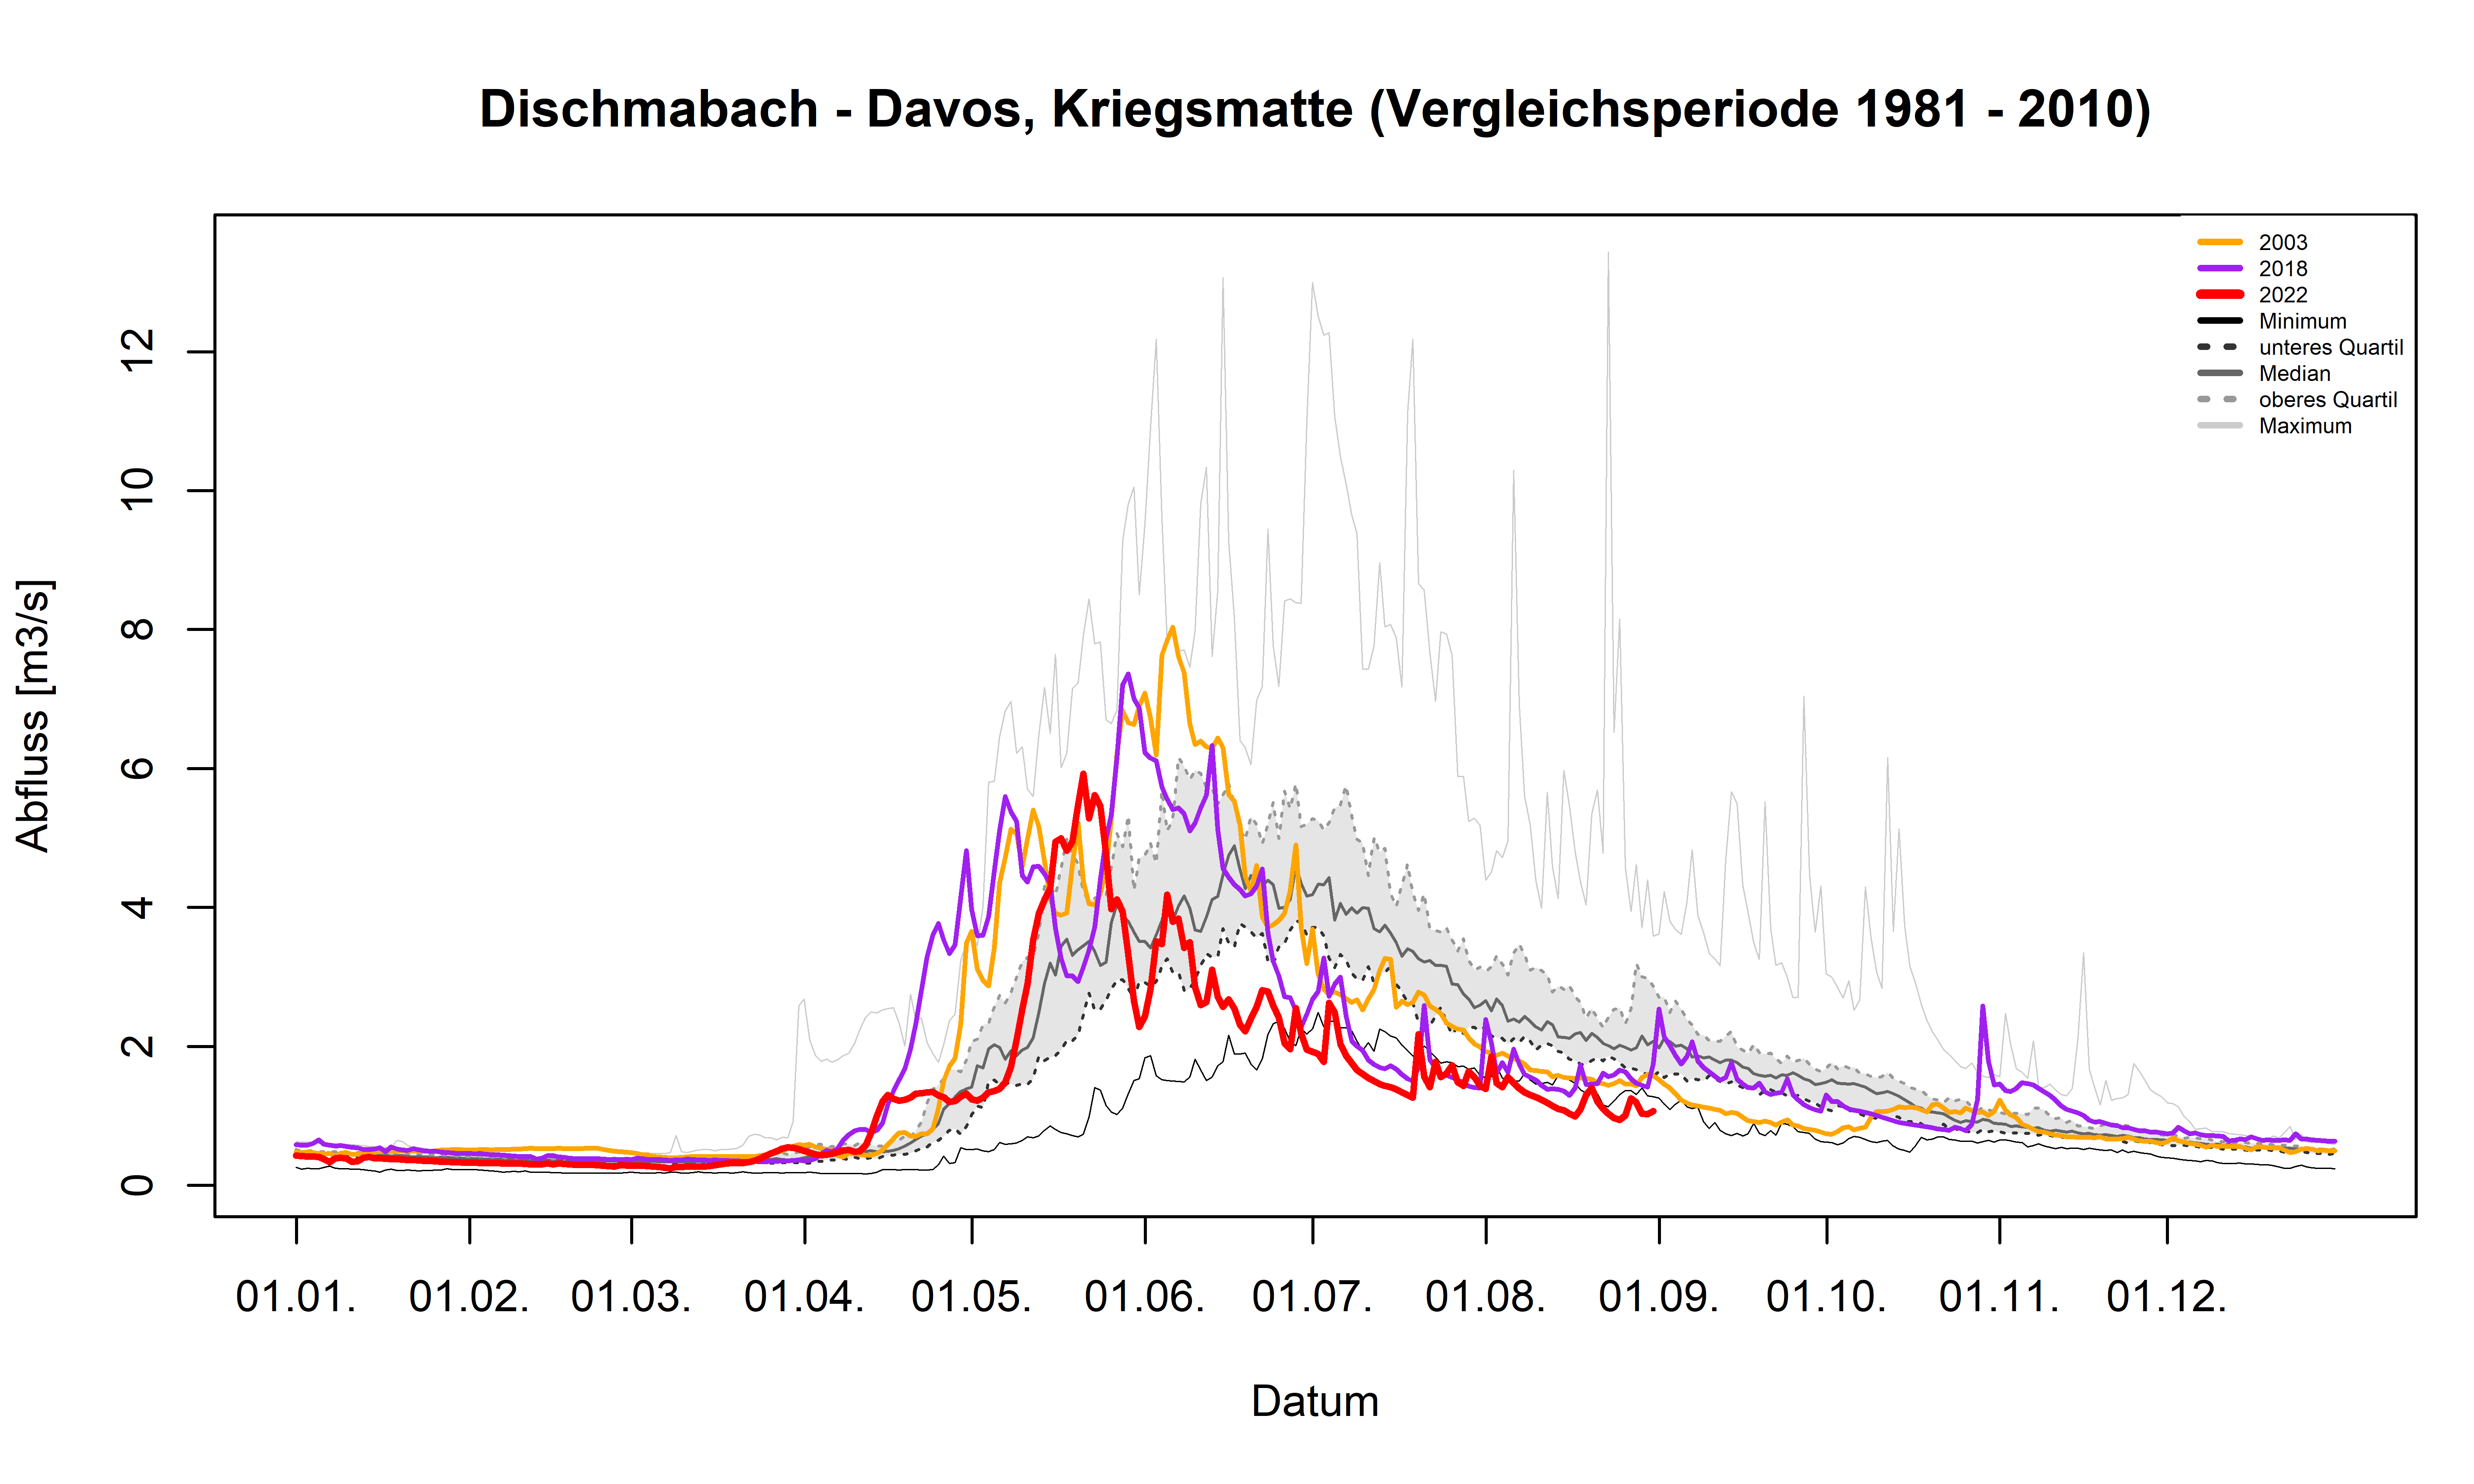 Messstation Dischmabach-Davos